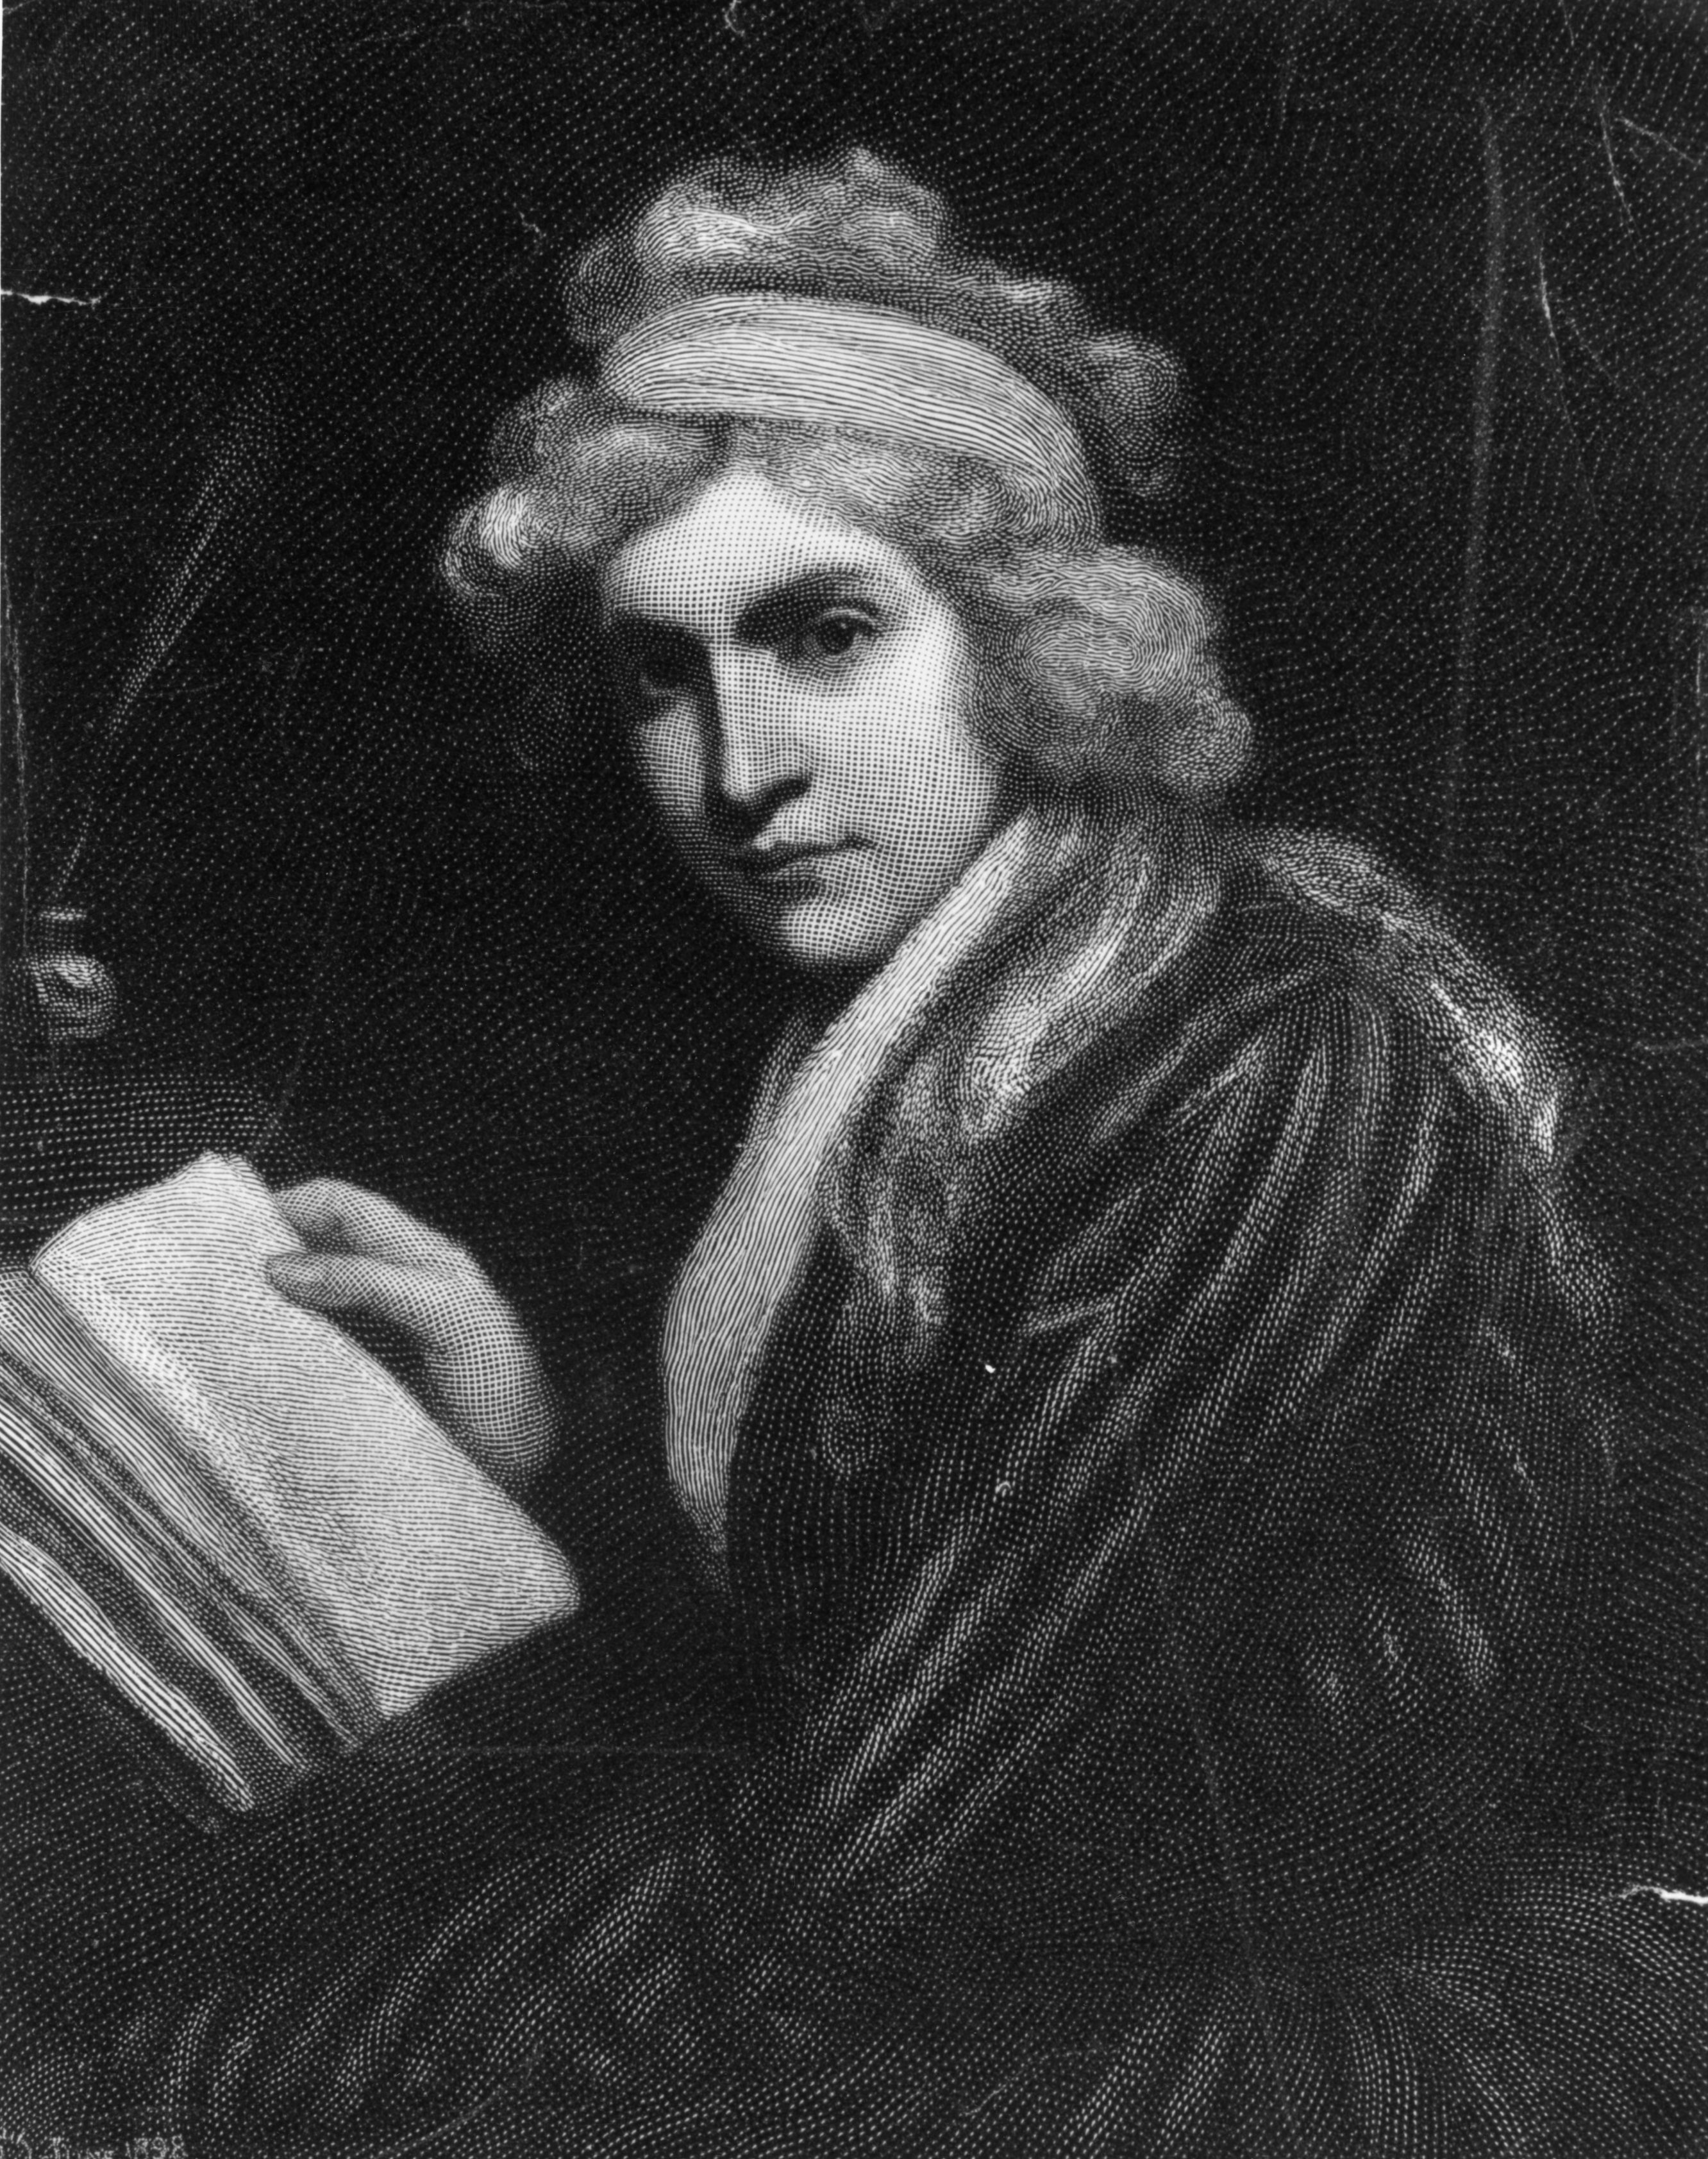 Mary Wollstonecraft, BritainIn 18th century Britain, Mary Wollstonecraft made the unprecedented claim that the rights of women are equal to those of men. In her two most famous works, A Vindication of the Rights of Men (1790) and A Vindication of the Rights of Woman (1791), she takes on Edmund Burke with her then-radical feminism.